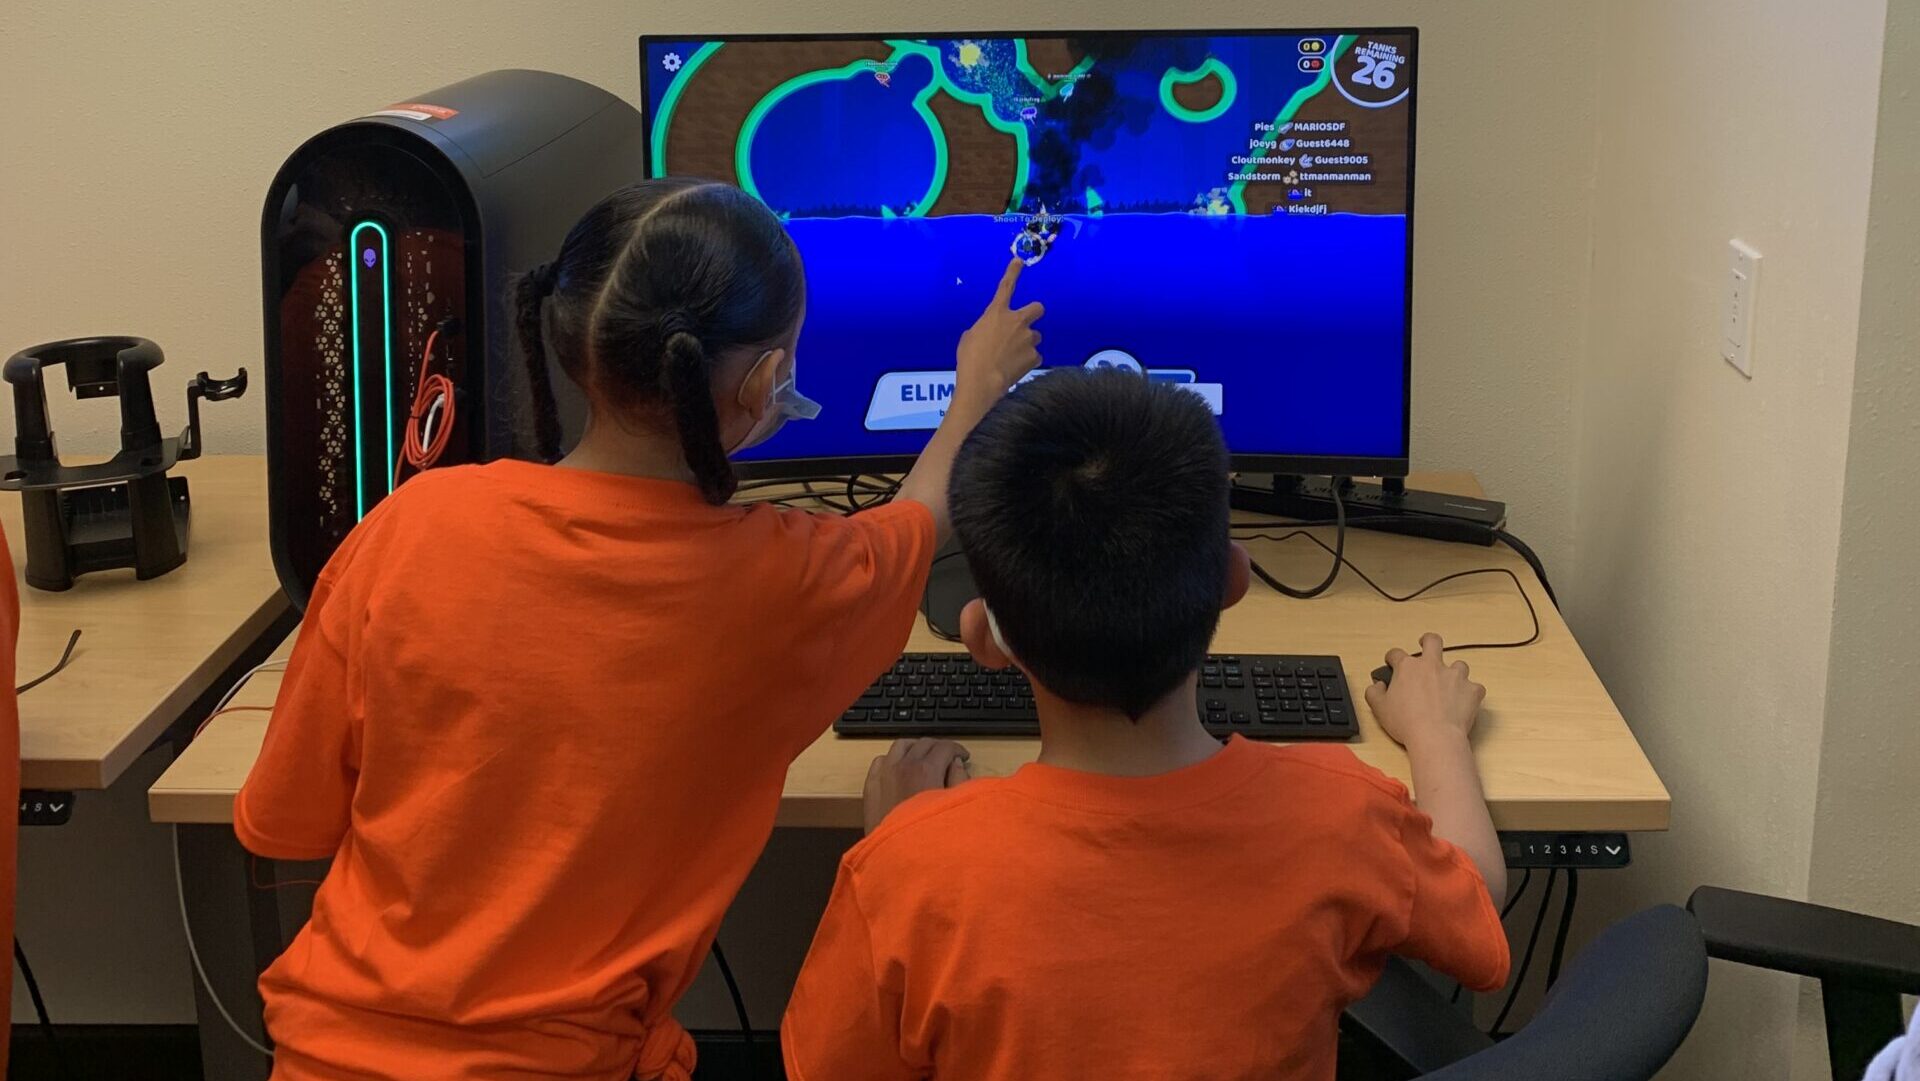 One child uses a mouse on a computer as another child points to the screen.